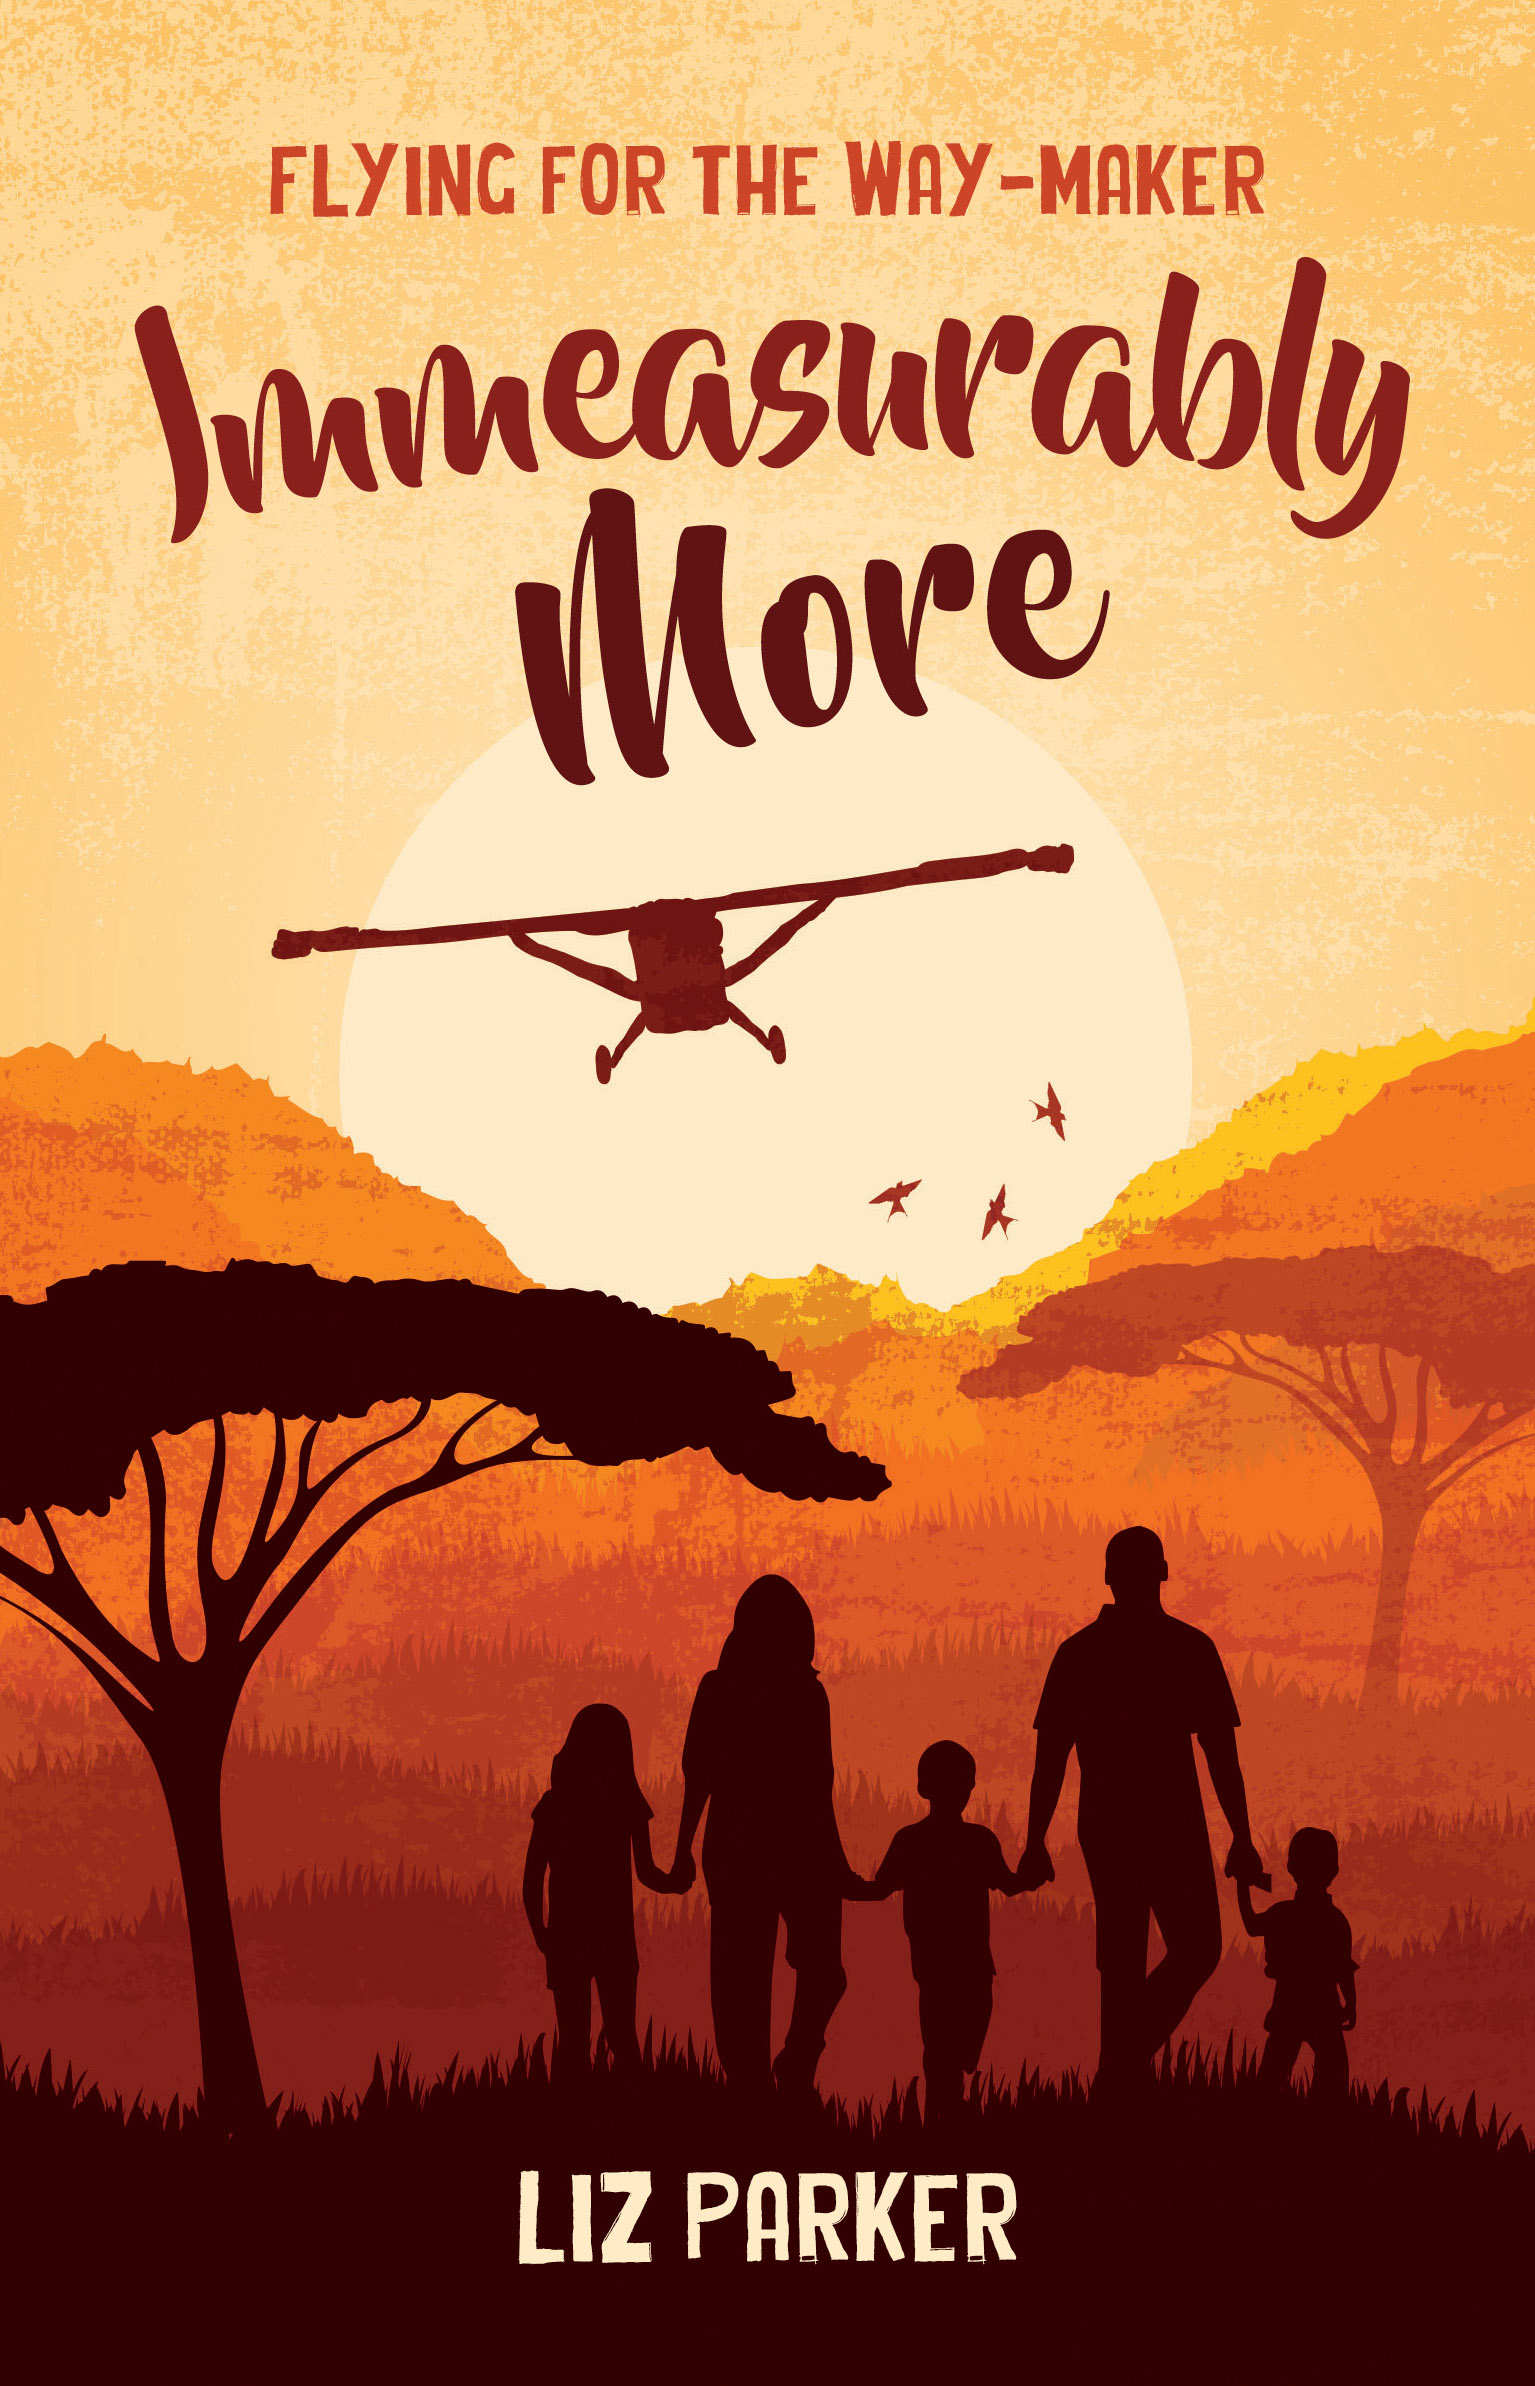 Immeasurably More - Flying for the Way-Maker